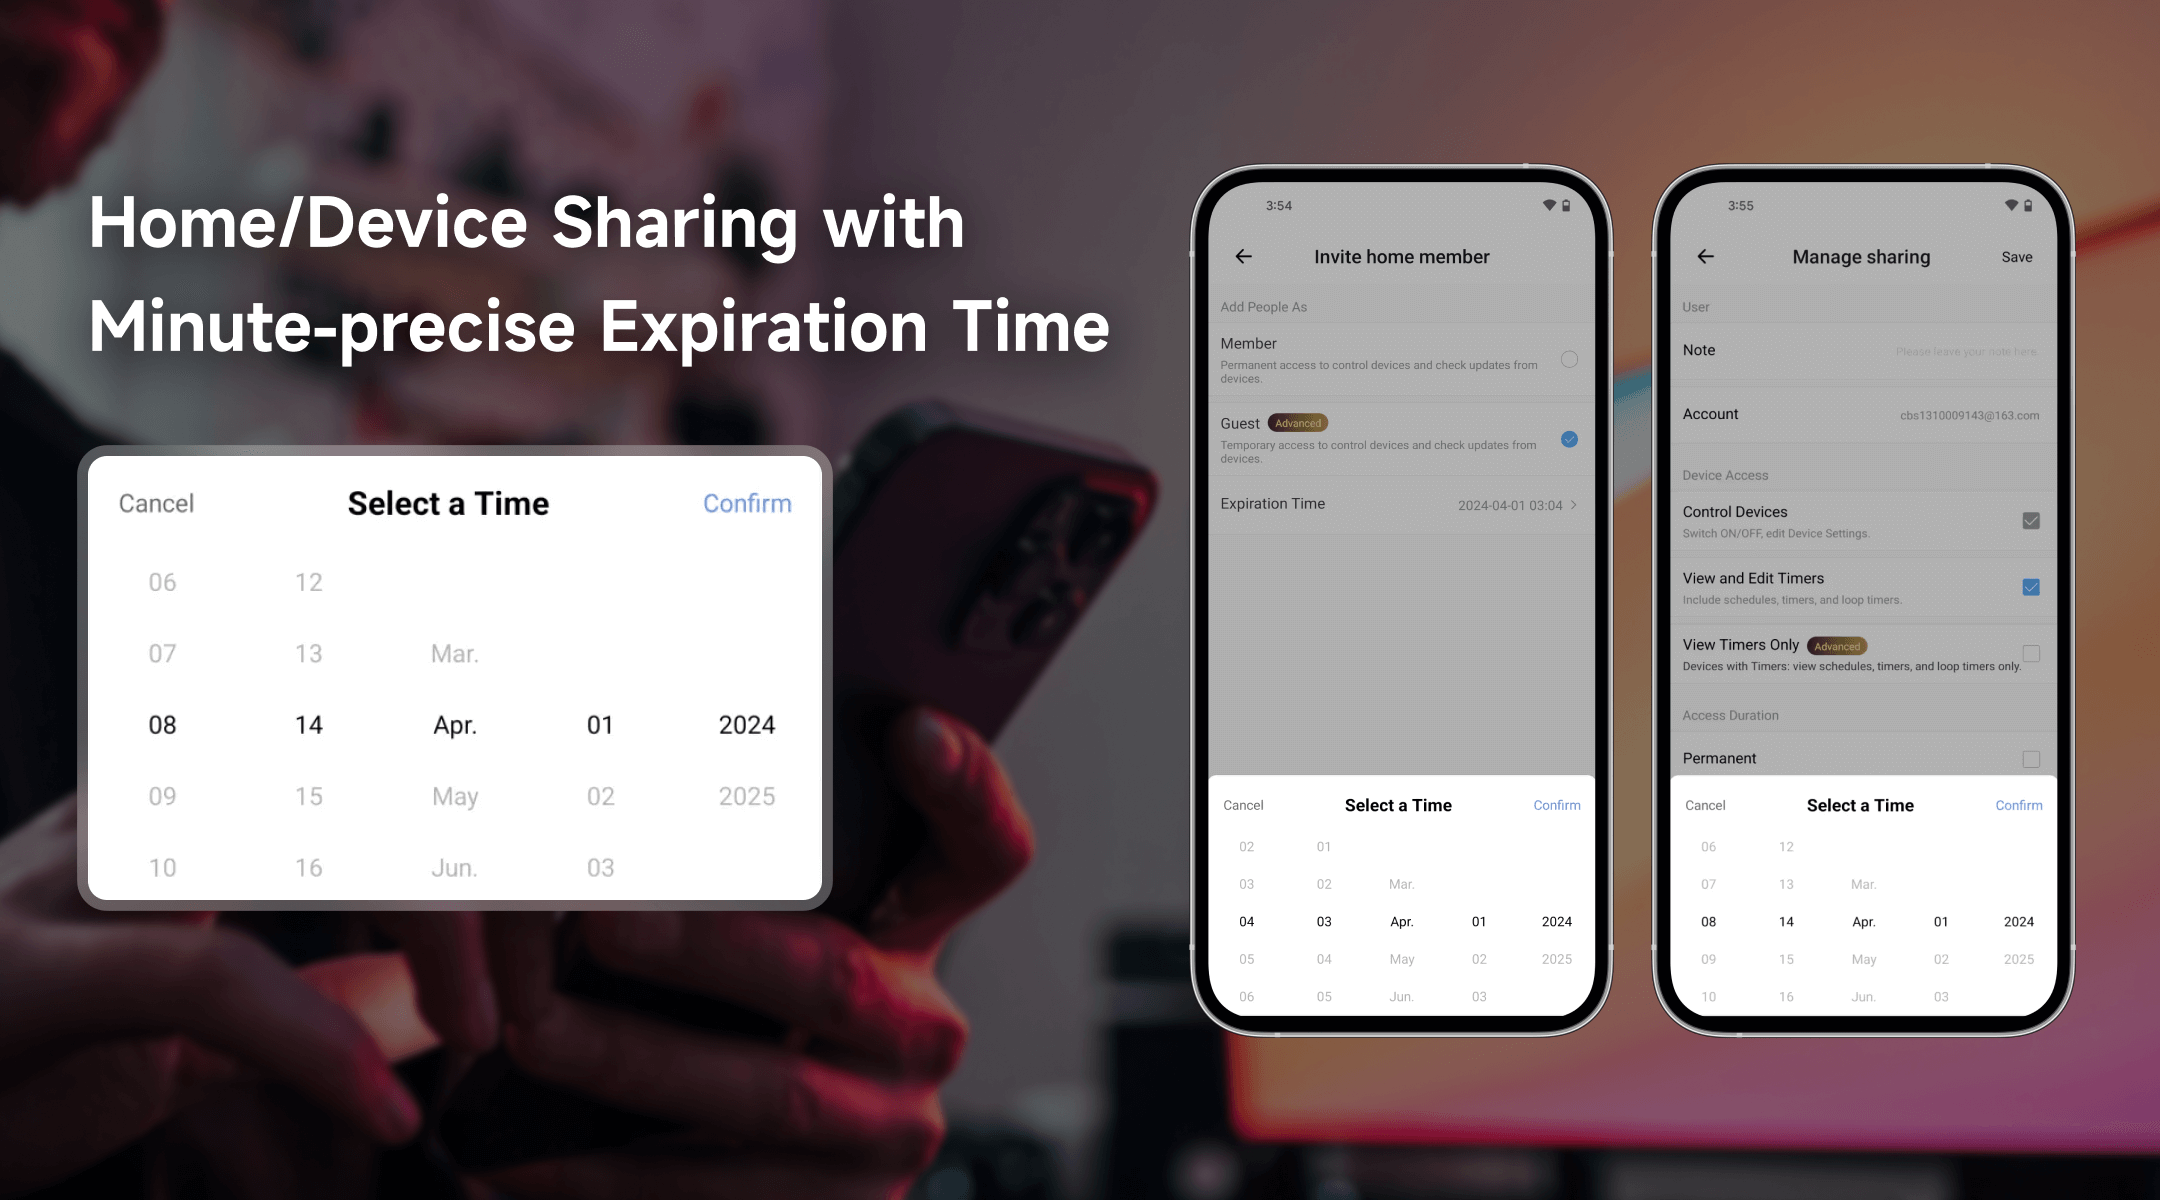 Home/Device Sharing with Minute-precise Expiration Time